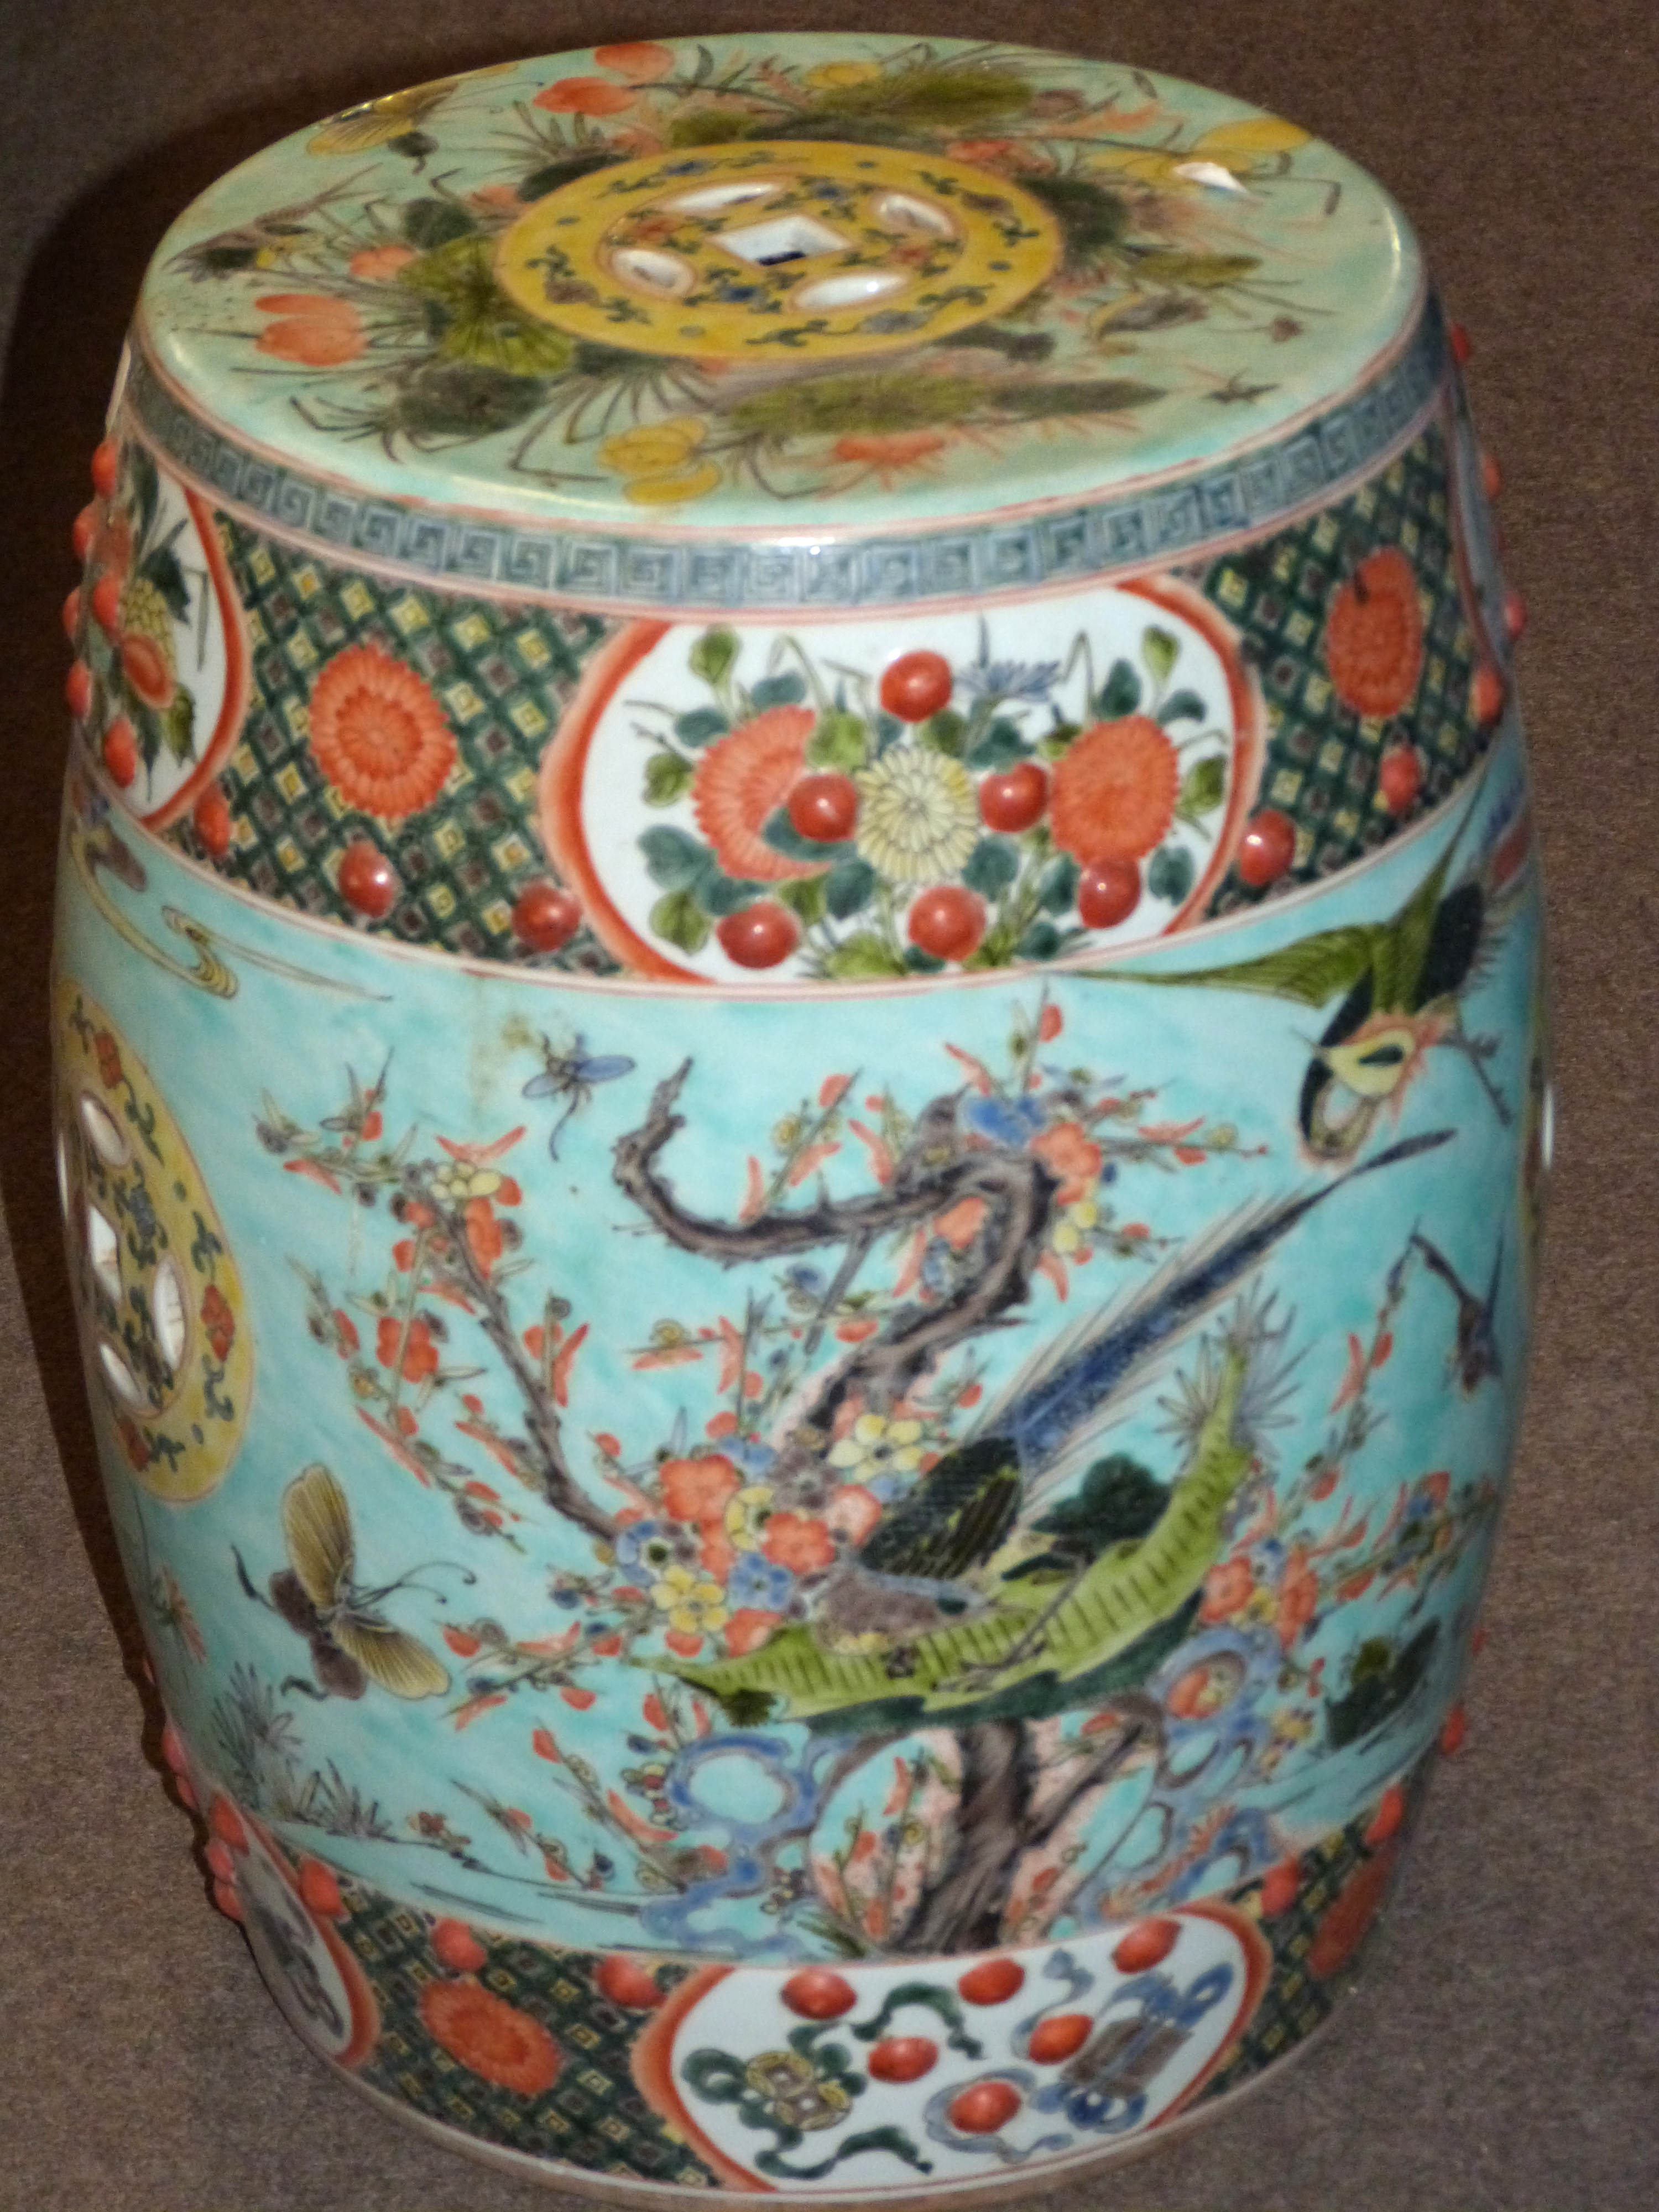 Chinese porcelain garden seat with polychrome decoration of birds amongst foliage with panels - Image 2 of 3